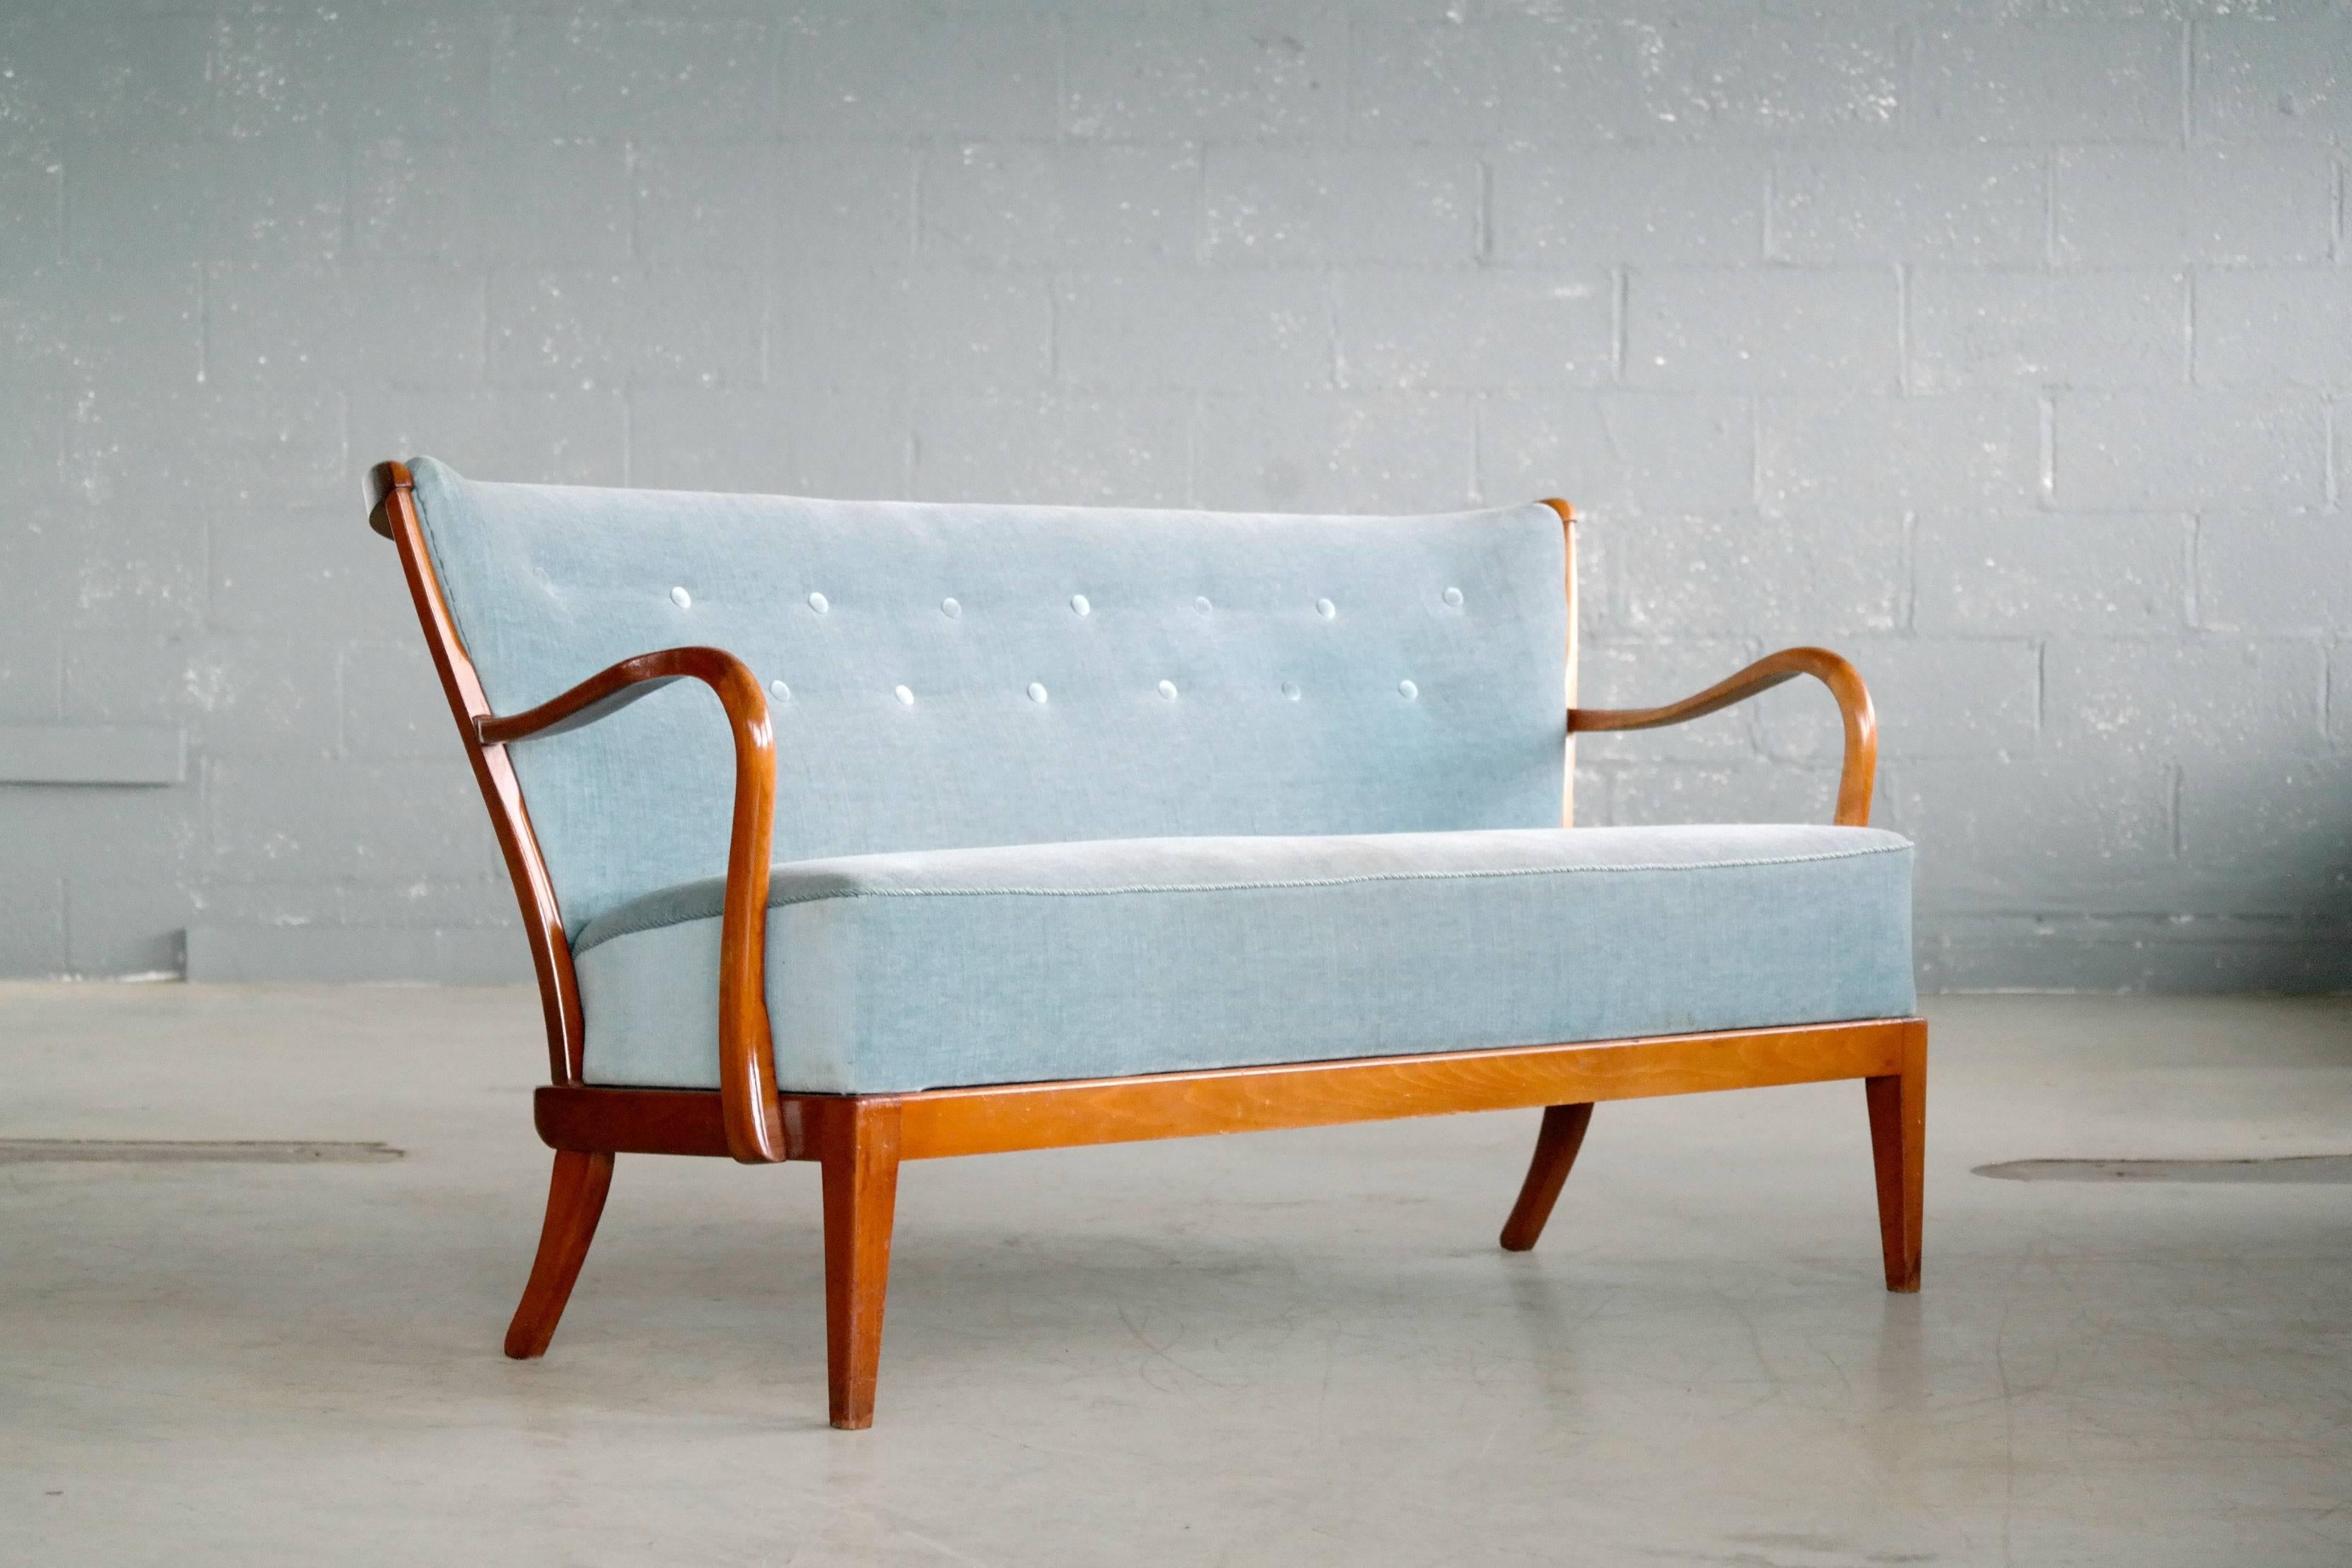 Fantastic 1940s Fritz Hansen attributed sofa in the company's characteristic style of open armrests and spindle back. Beautiful refined lines with curving arms, spring seating and tufted back. Some wear to the lacquer mainly on the armrests that we